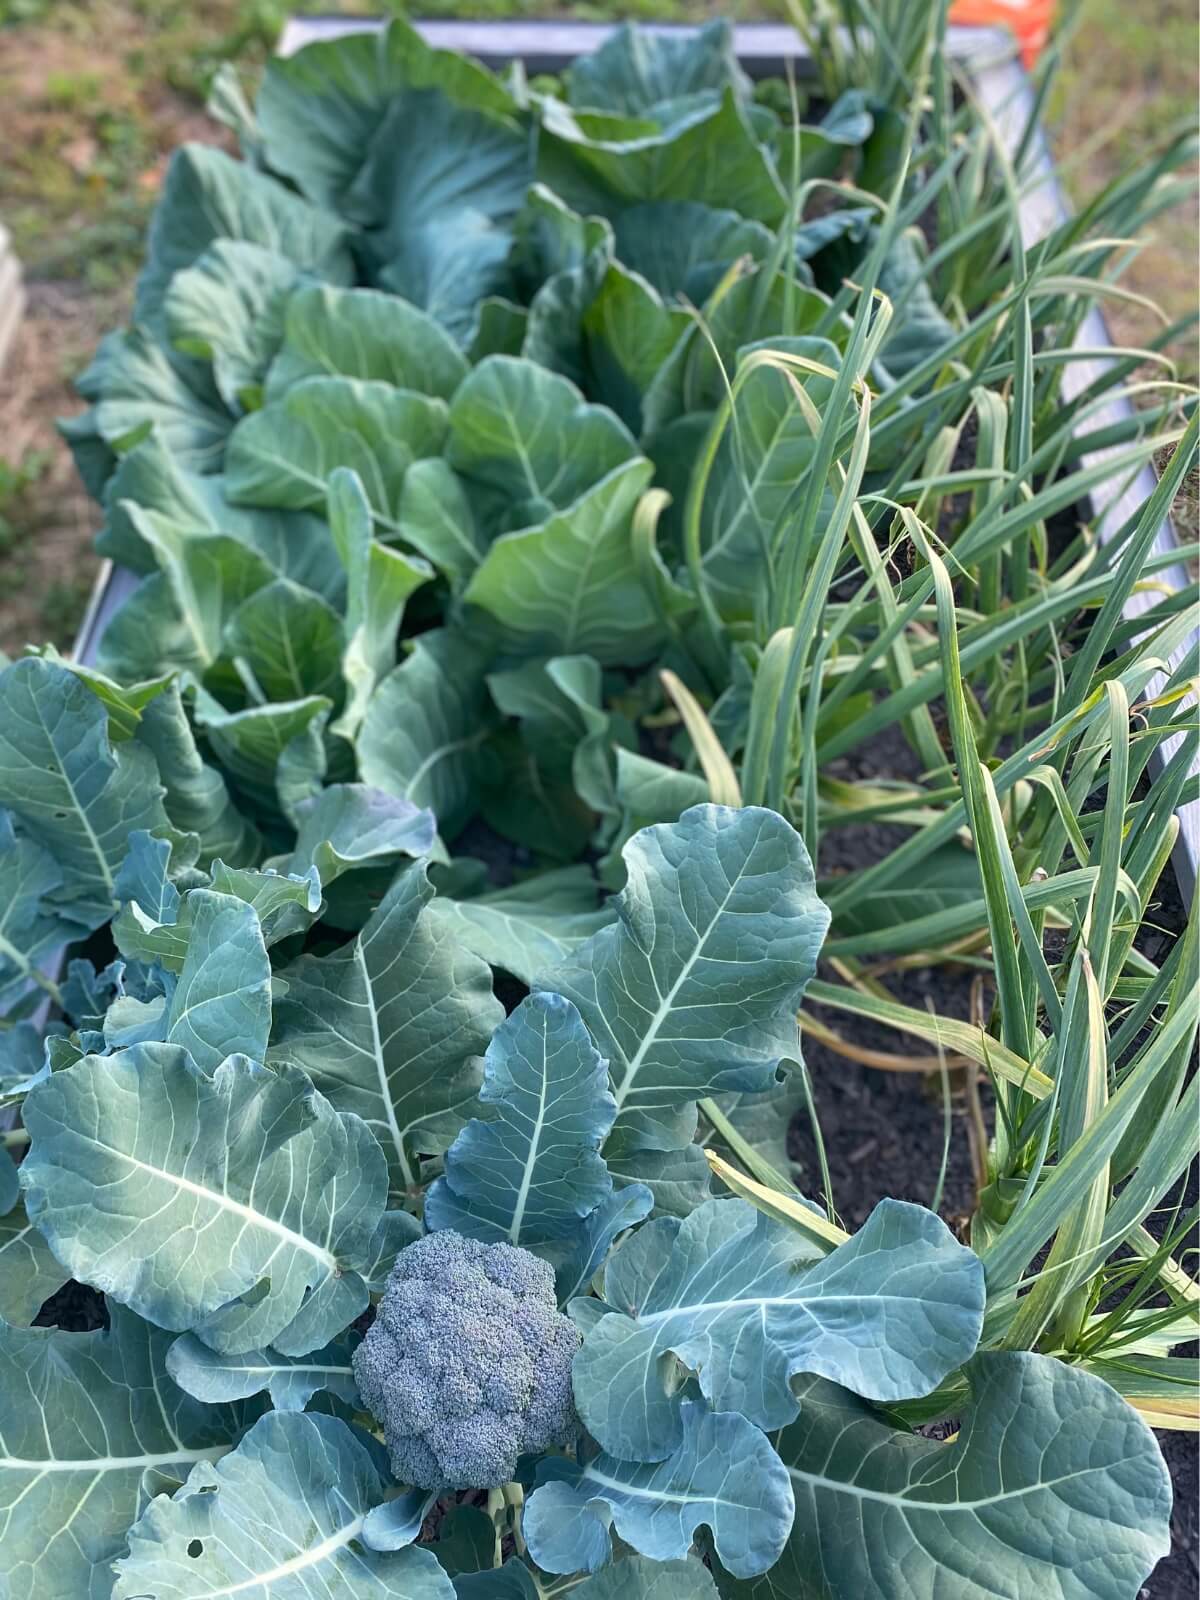 cabbage companion planted with broccoli and garlic